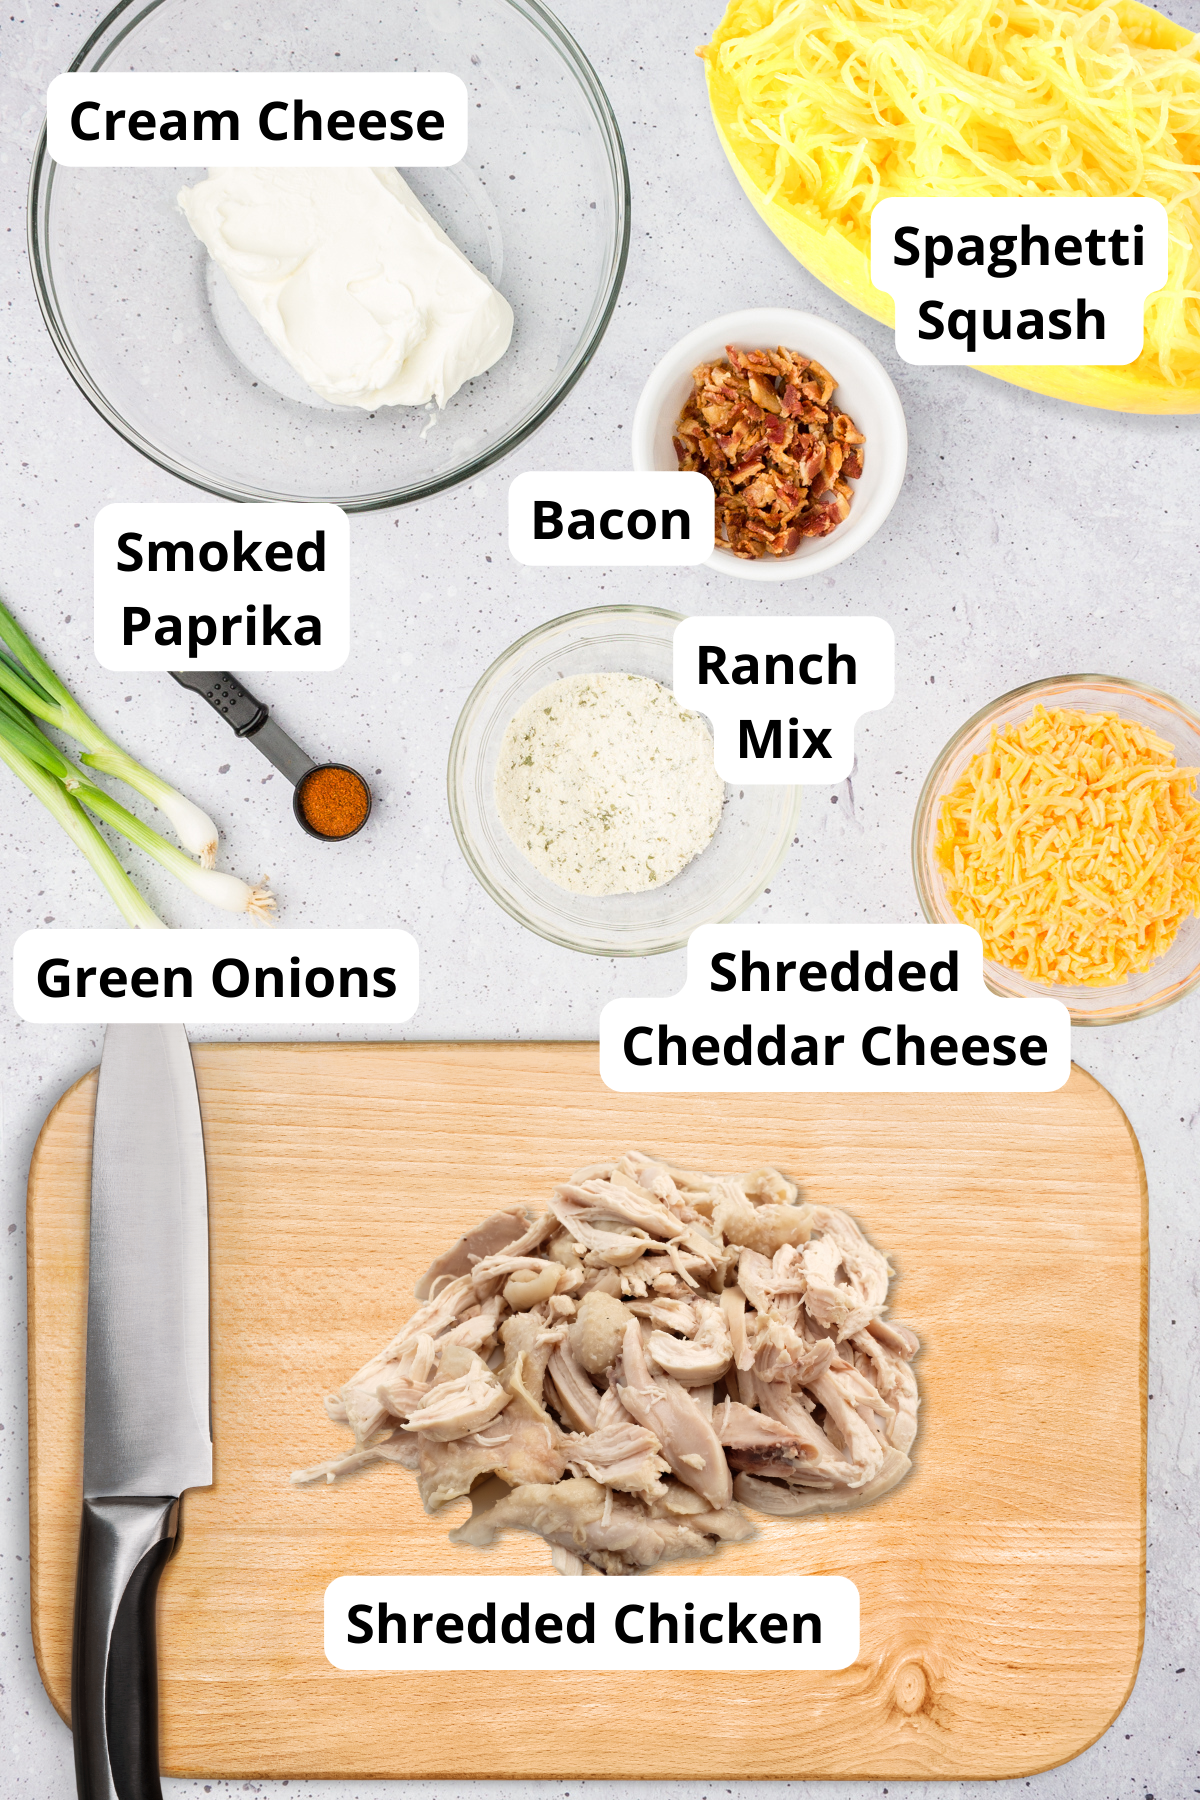 ingredients to make this keto chicken ranch pasta recipe served over spaghetti squash